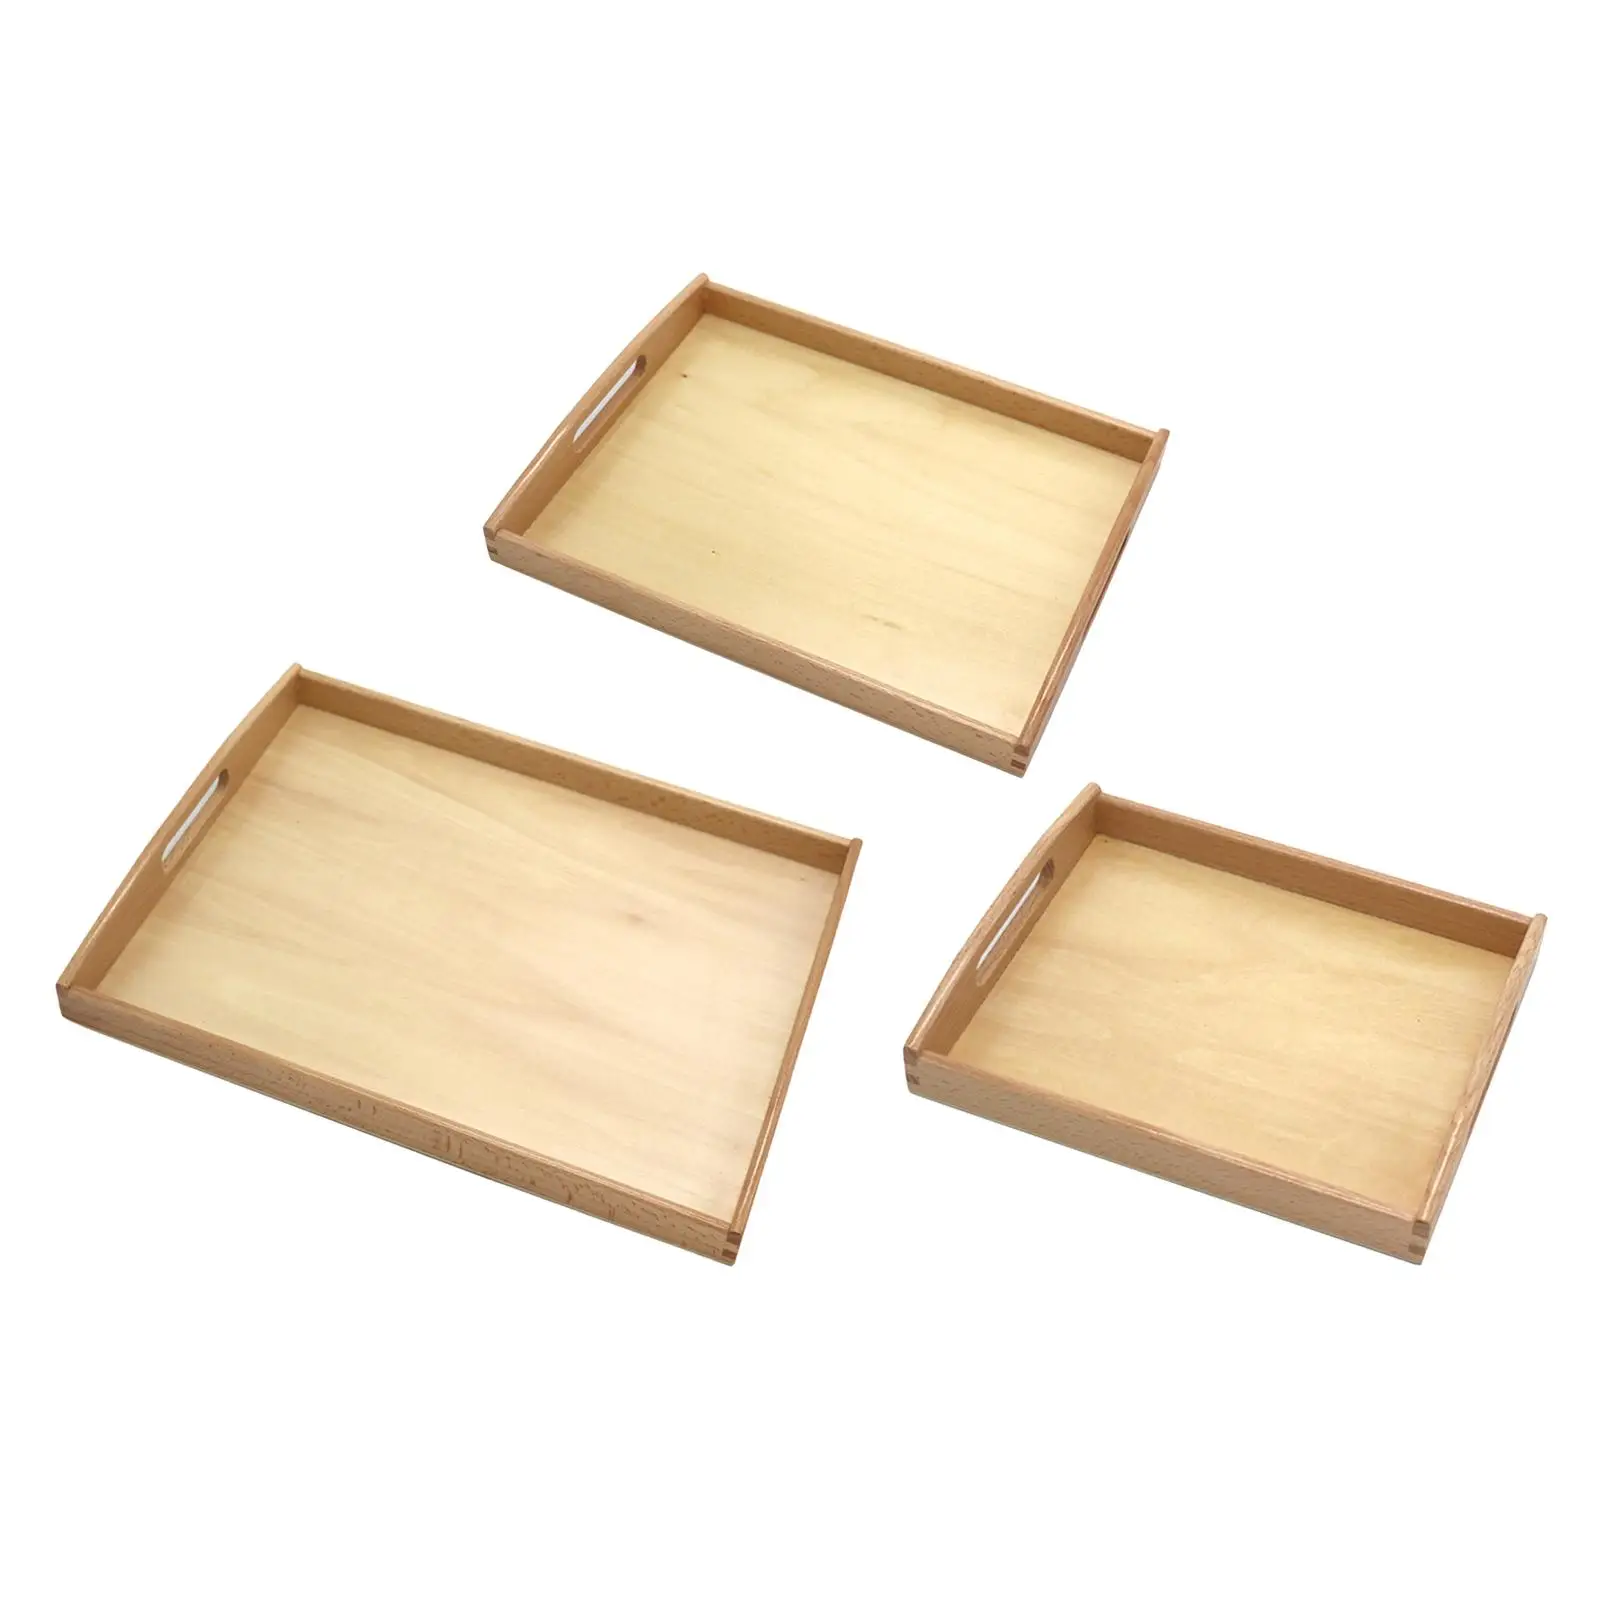 Montessori Wooden Tray Montessori Sand Tray Toy for Painting Activities Home